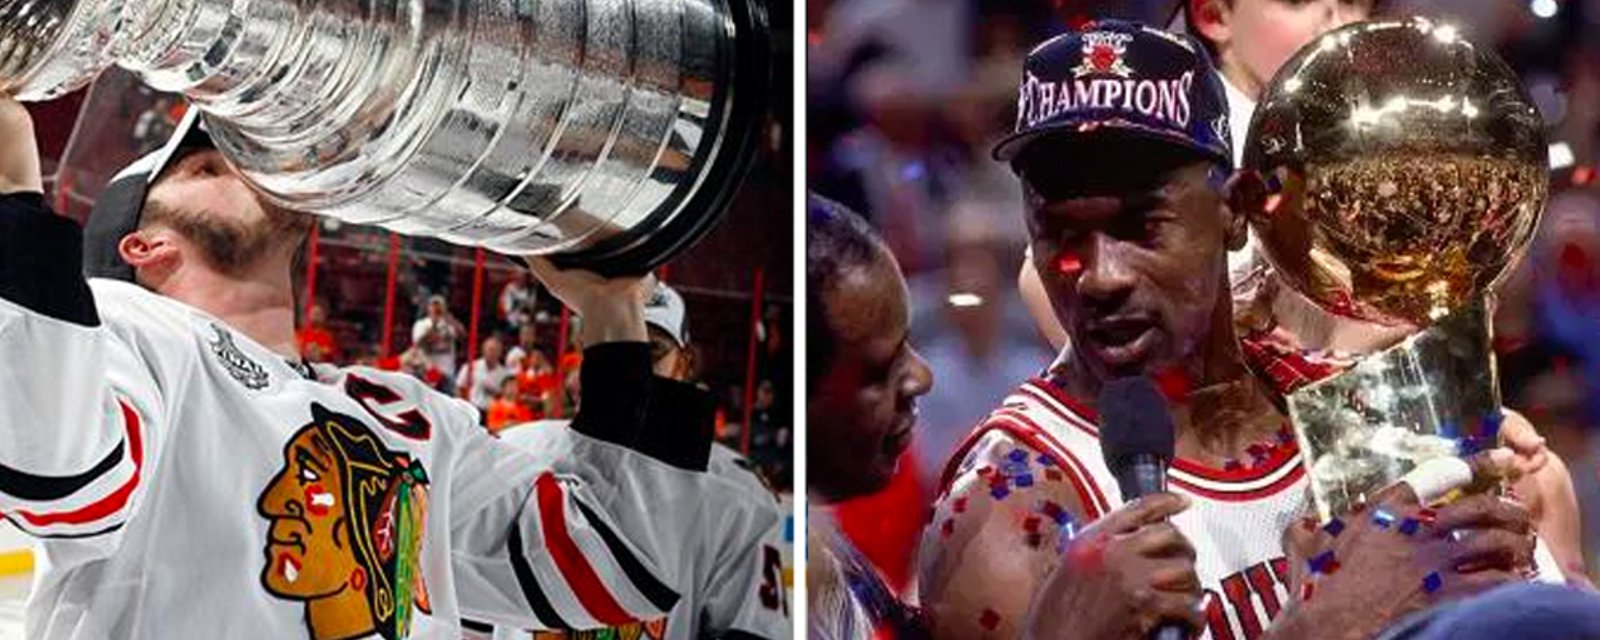 Why the Blackhawks thought 2010 was their “Last Dance” like the 1998 Bulls